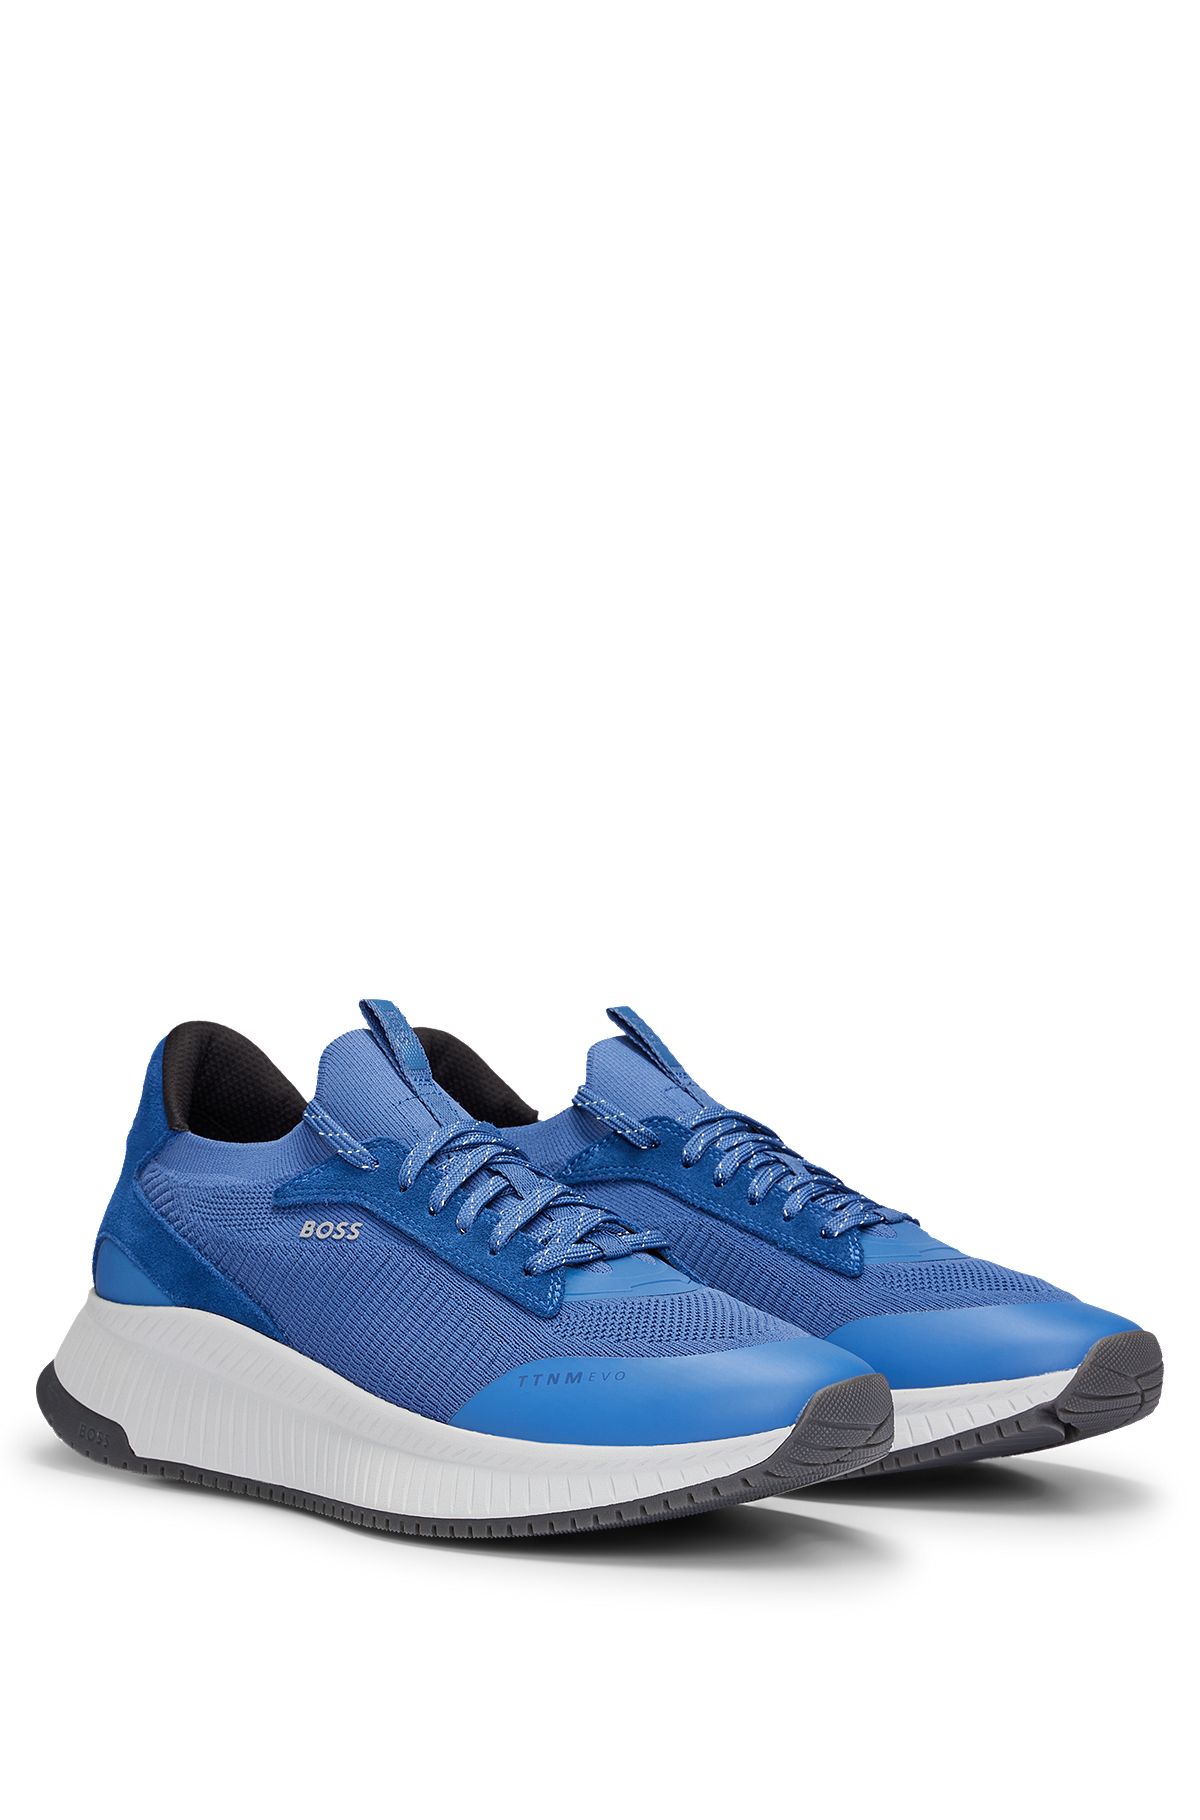 TTNM EVO trainers with knitted upper, Blue